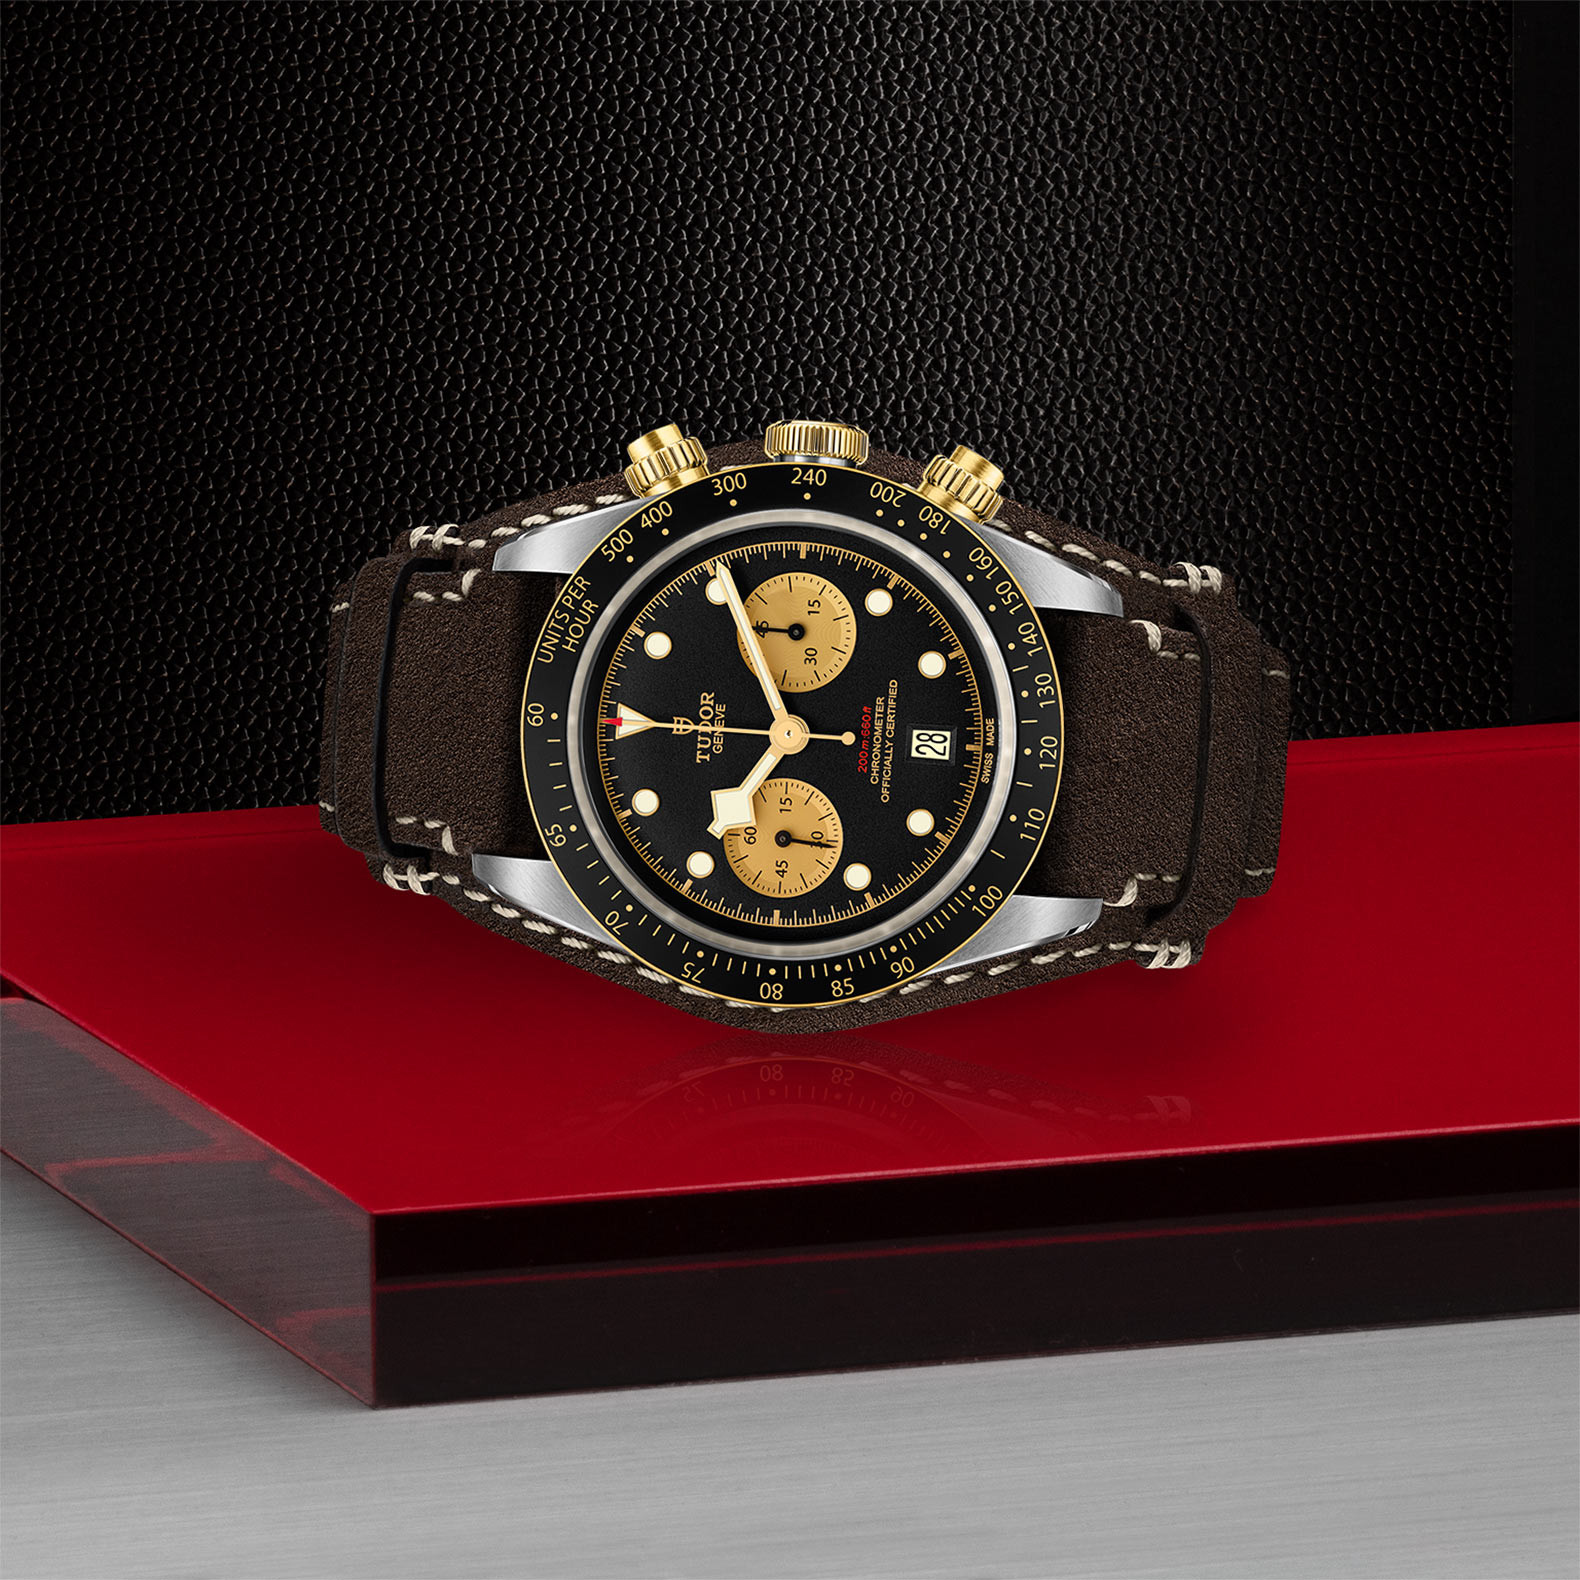 TUDOR Black Bay Heritage Chrono S&G Watch in Store Laying Down